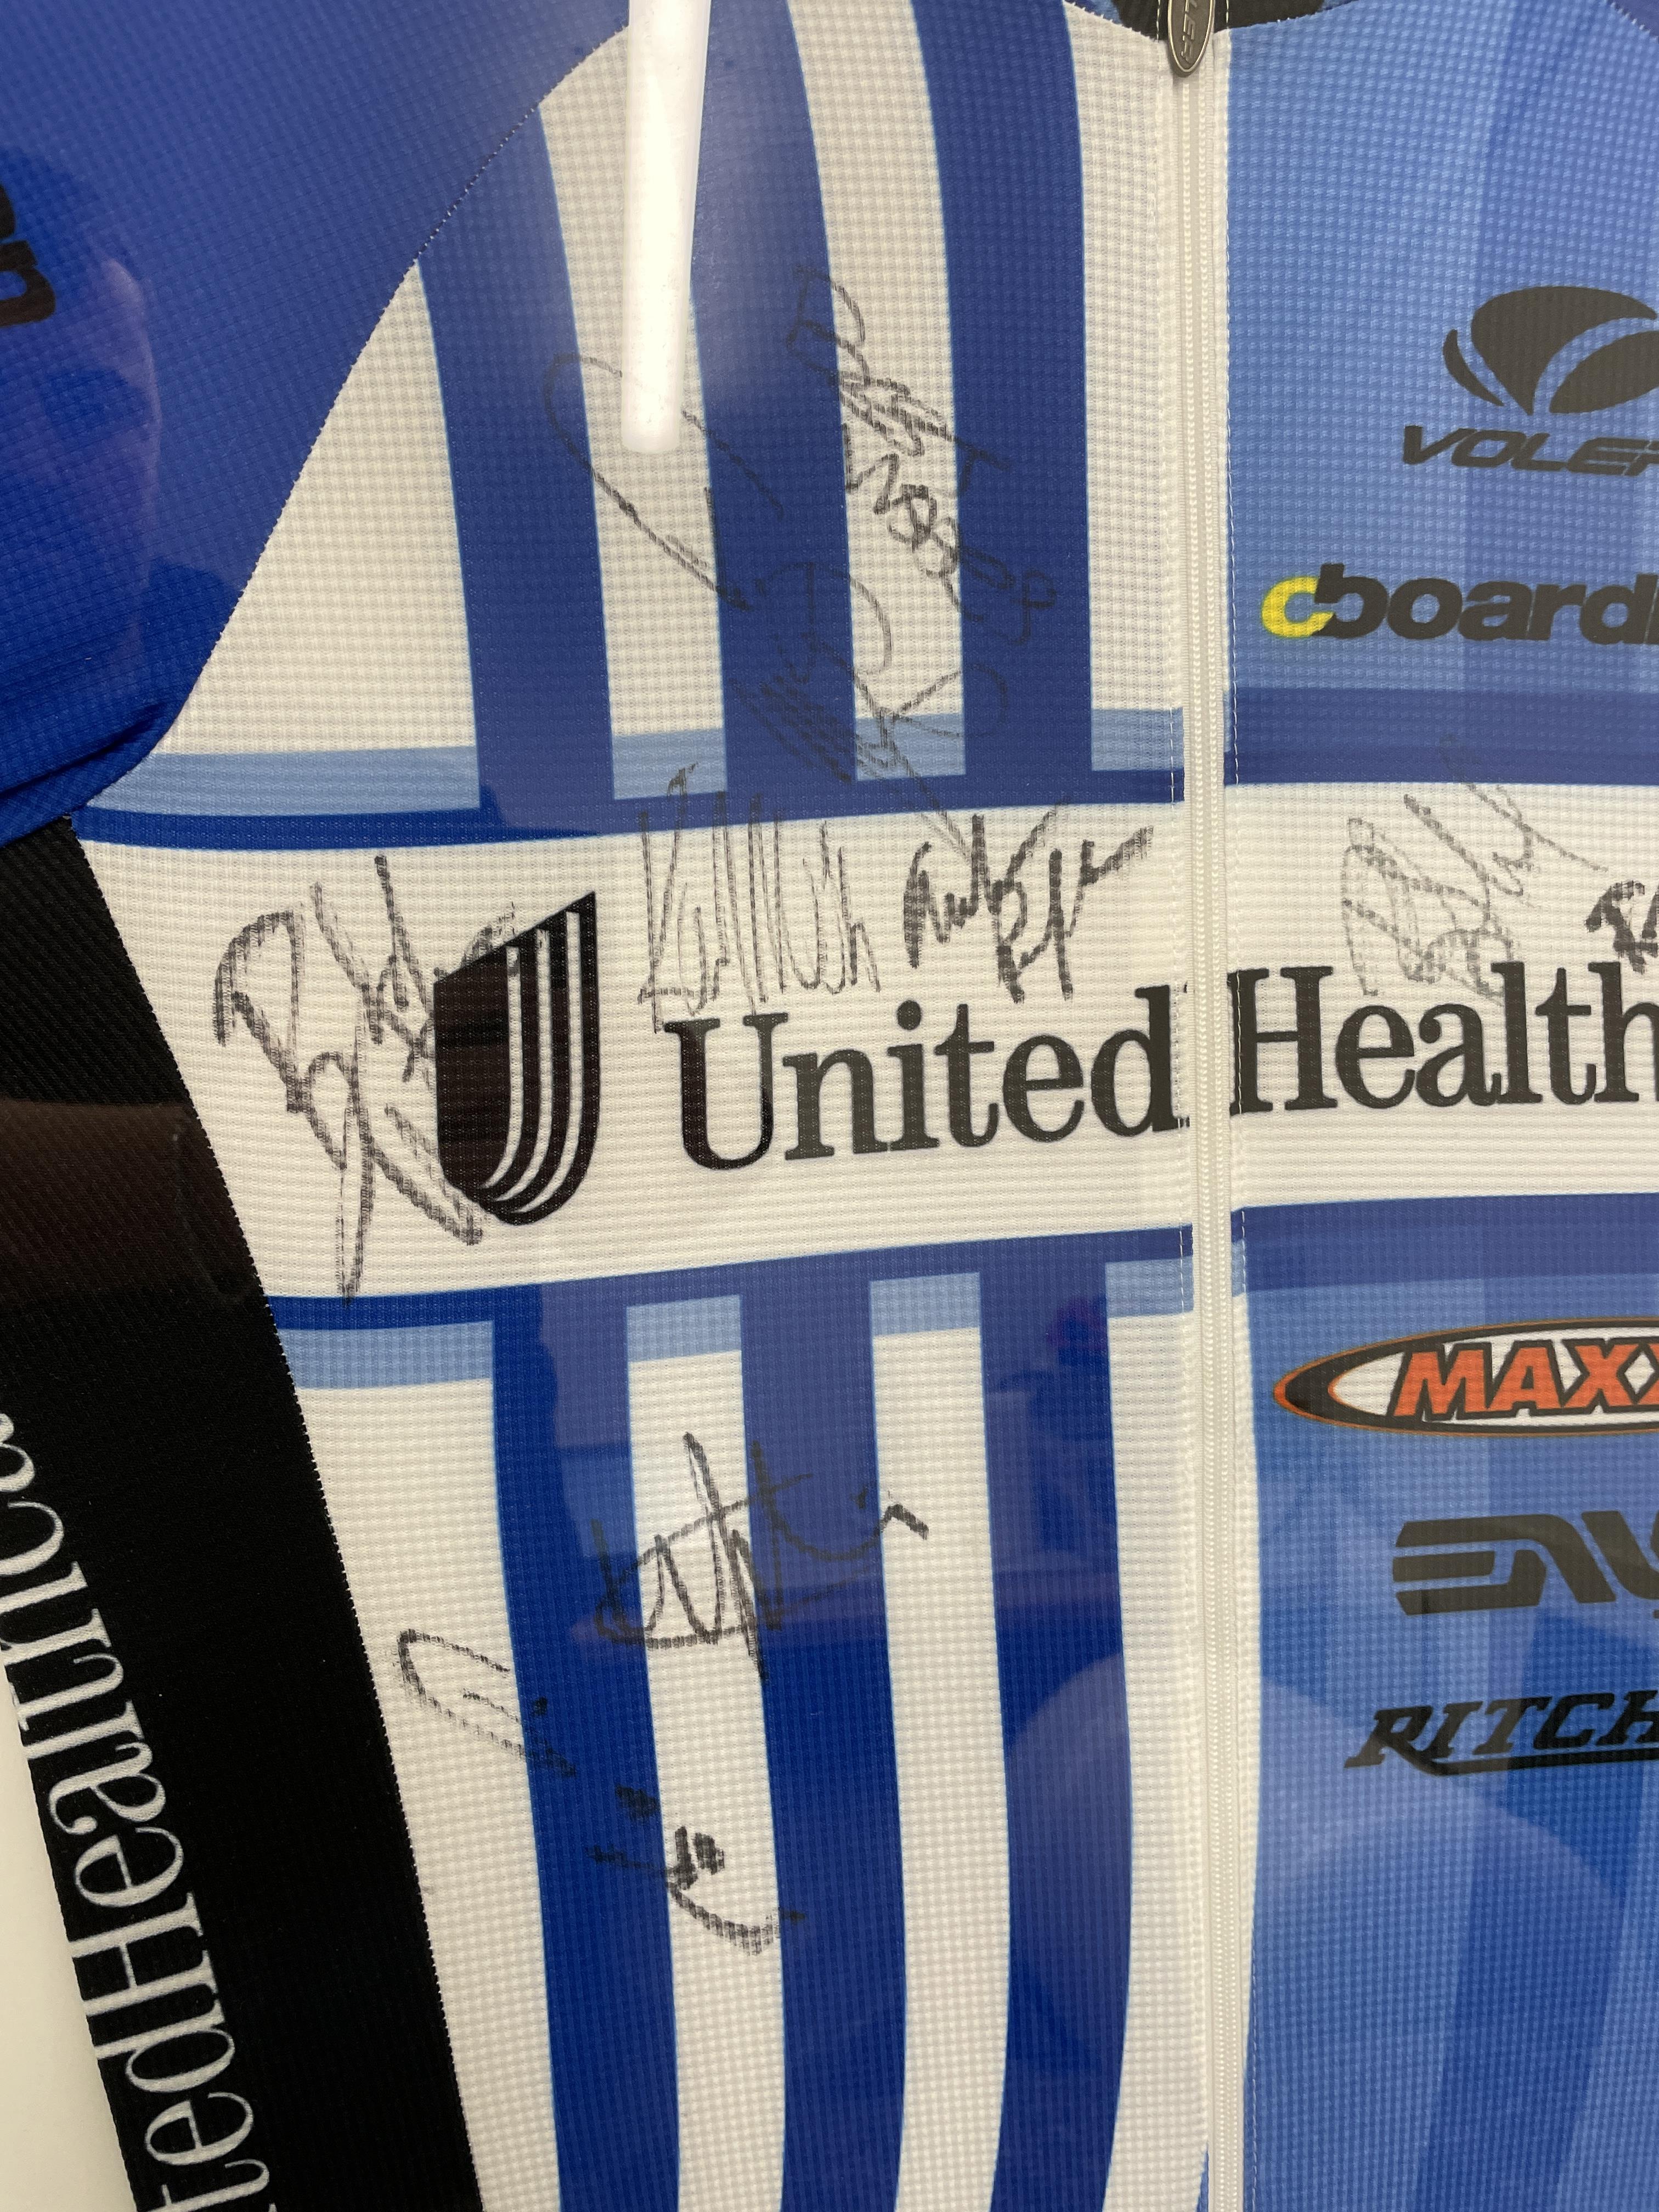 United Health Care - Maxxis Framed & Signed Pro Cycling Team Jersey with Multiple Signatures (Circa - Image 2 of 3